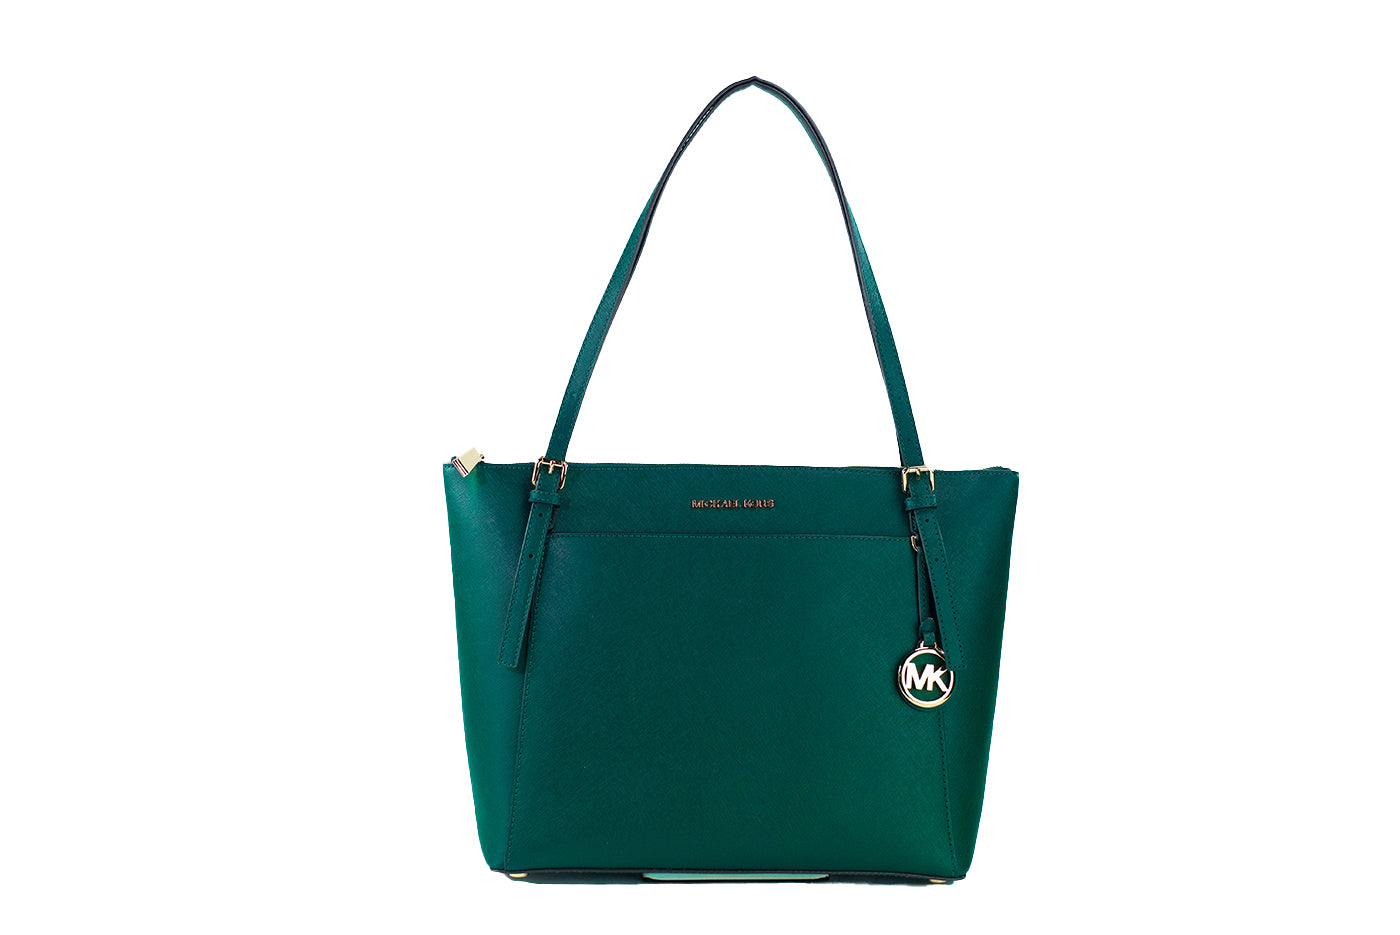 Michael Kors Voyager Travel Shoulder Tote Racing Green Saffiano Leather 